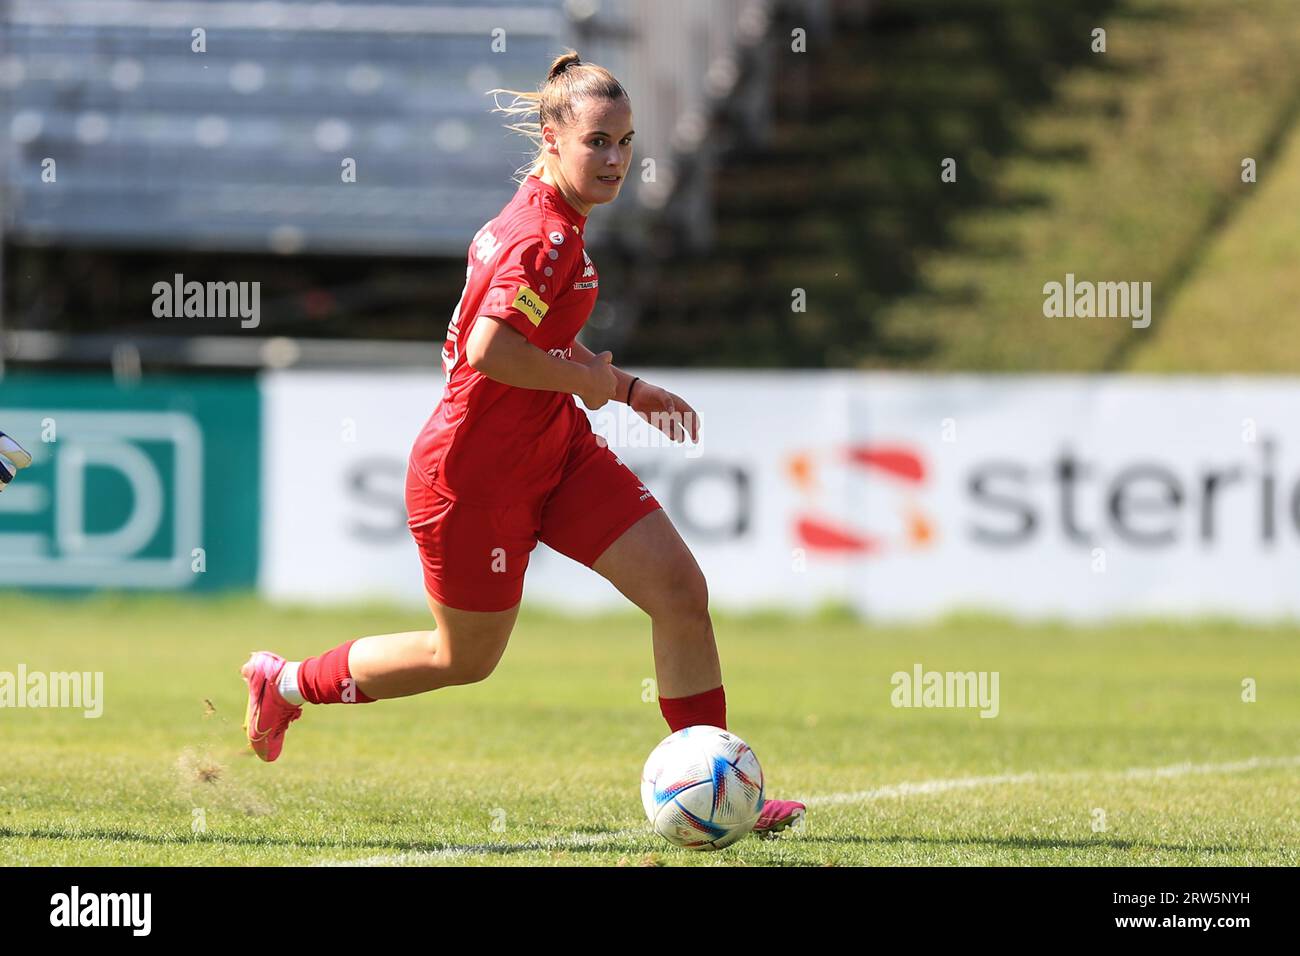 Lucia Orkic (18 Bergheim) in action during the Admiral Frauen Bundesliga match Vienna vs Bergheim at Hohe Warte (Tom Seiss/ SPP) Credit: SPP Sport Press Photo. /Alamy Live News Stock Photo